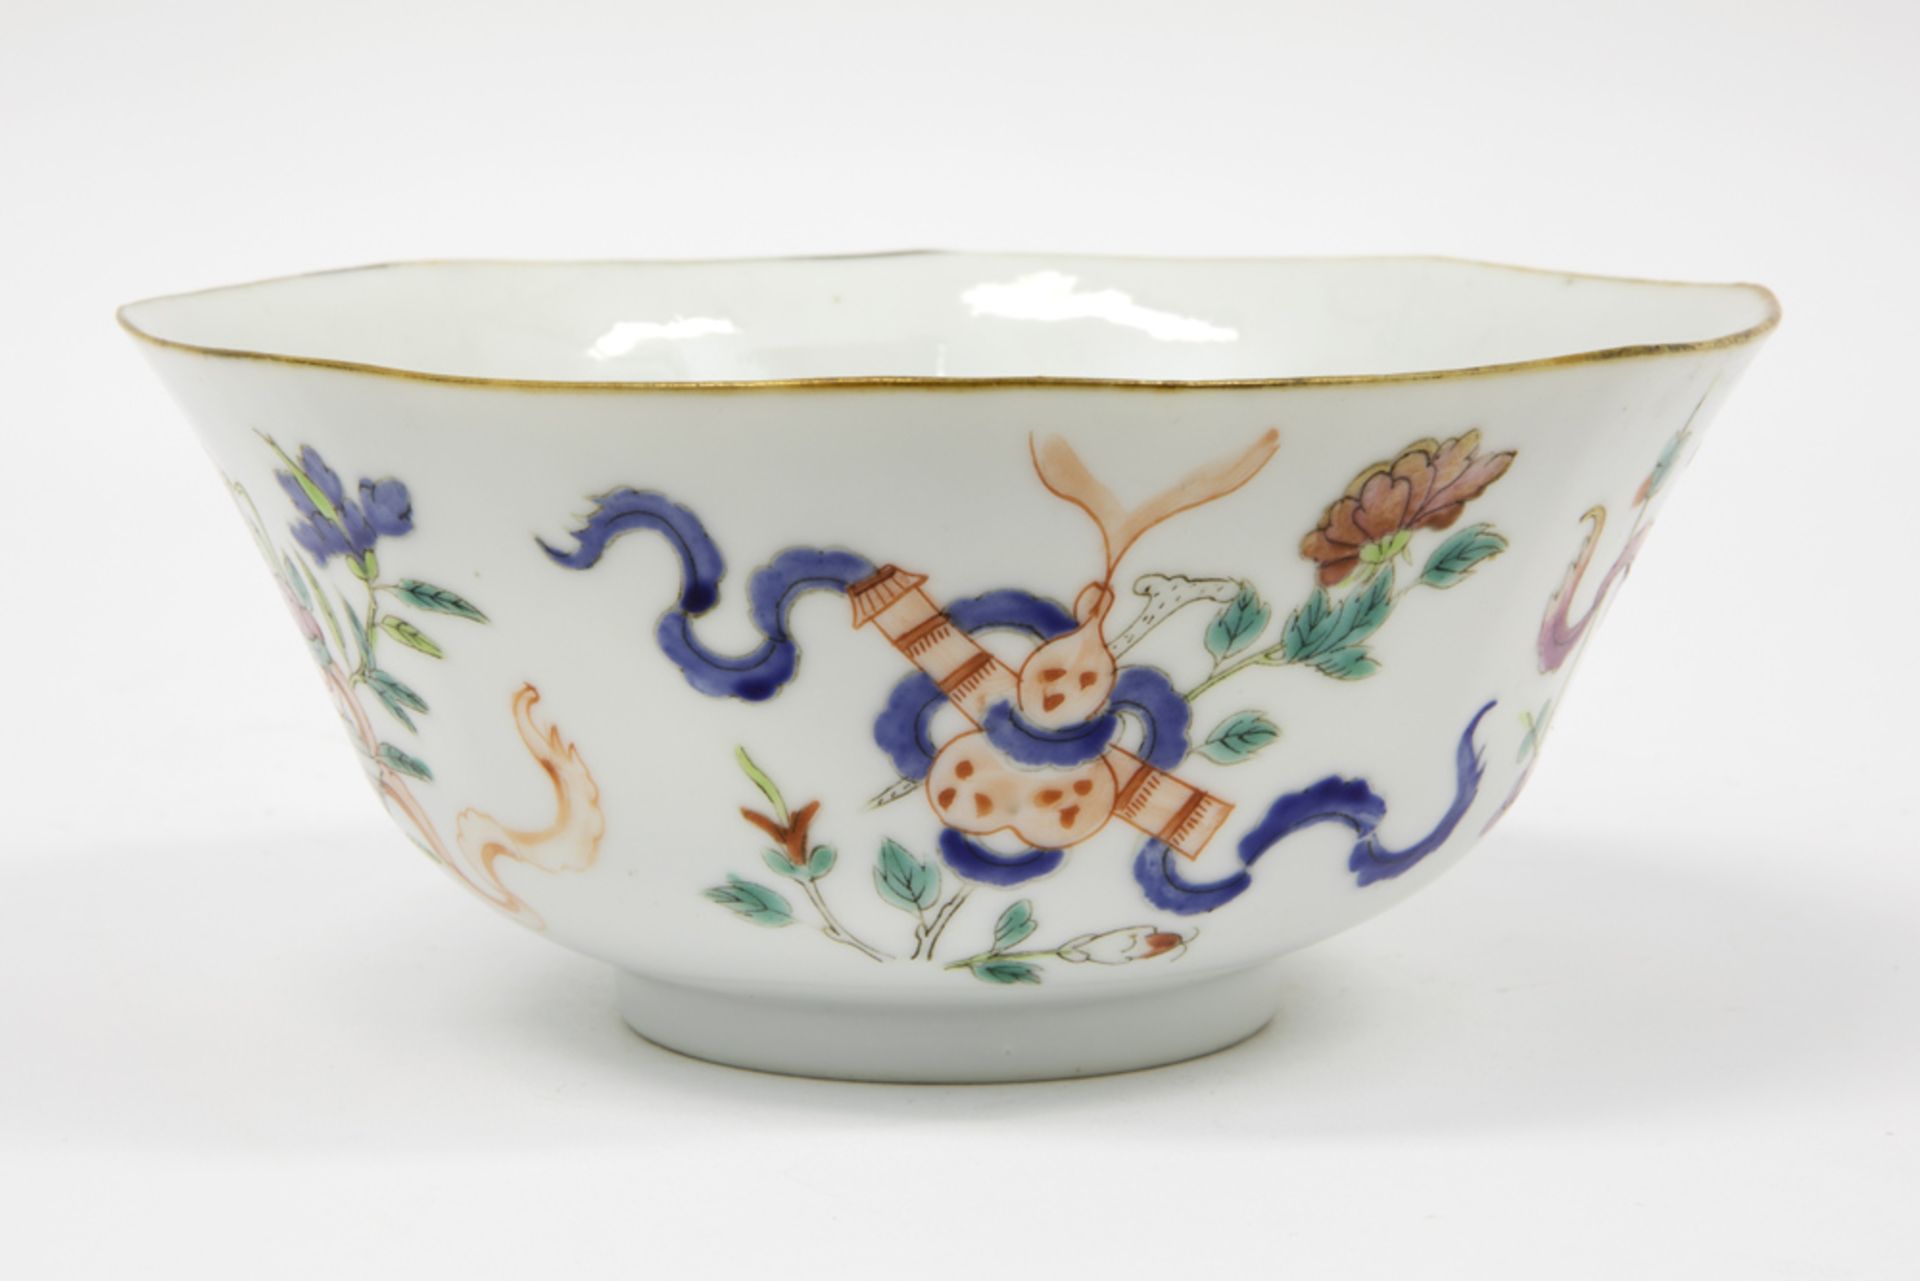 19th Cent. Chinese bowl in Hsien Feng (Xian Feng) marked porcelain with a polychrome decor || - Image 2 of 7